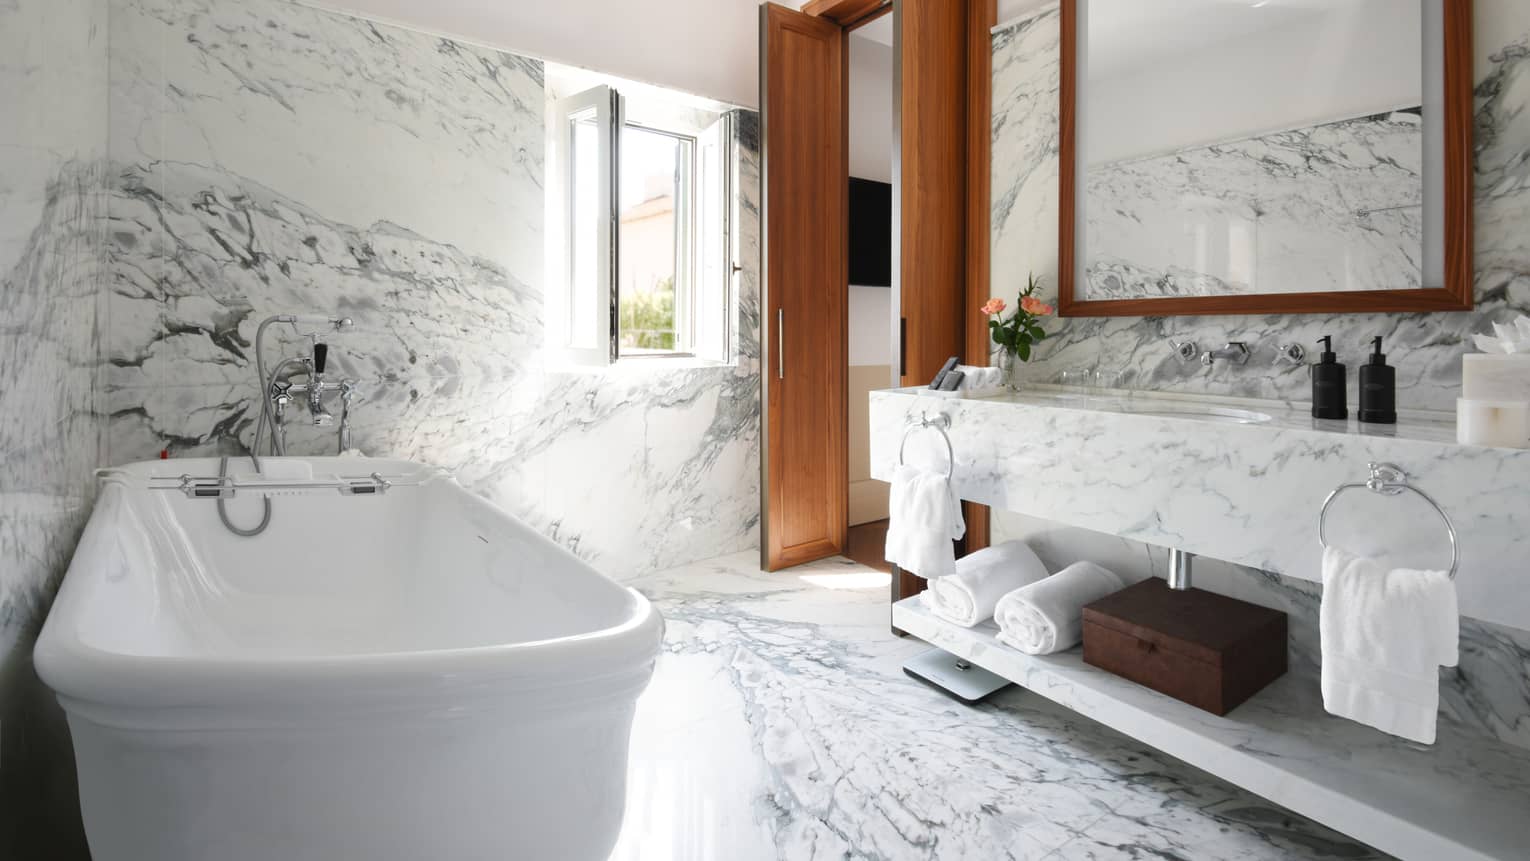 A bathroom with marble walls and floor, a tub, a. large mirror, and bath accessories.